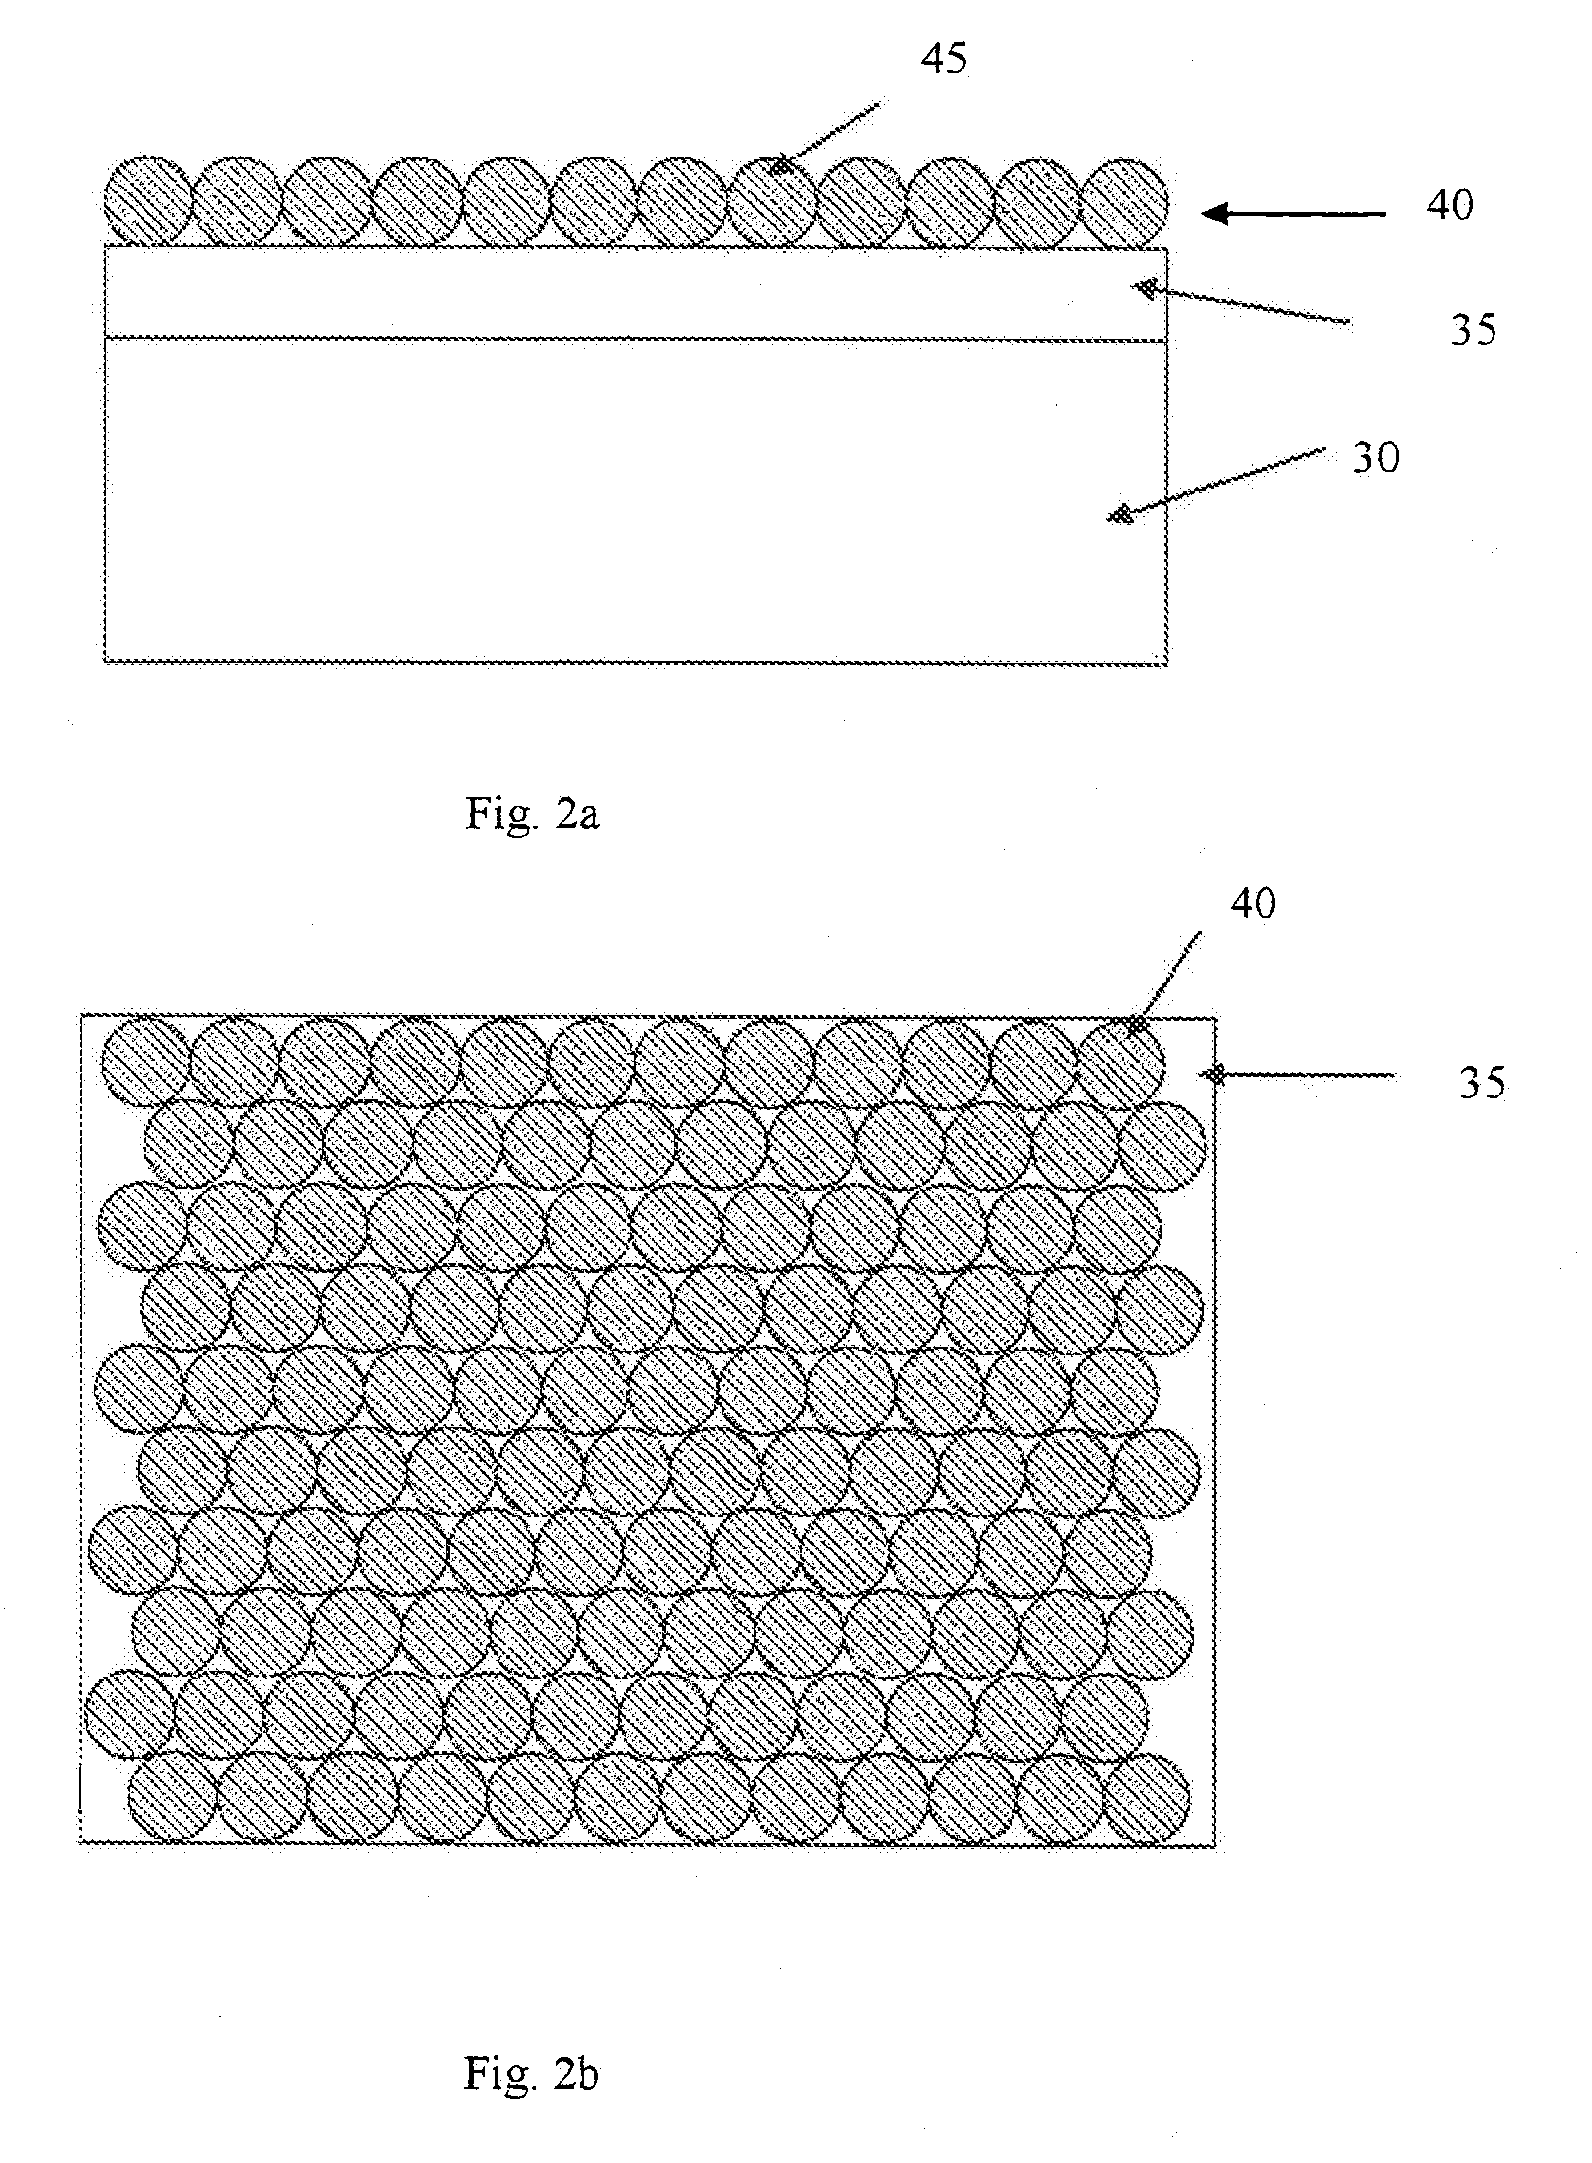 Method for fabricating micro and NANO structures